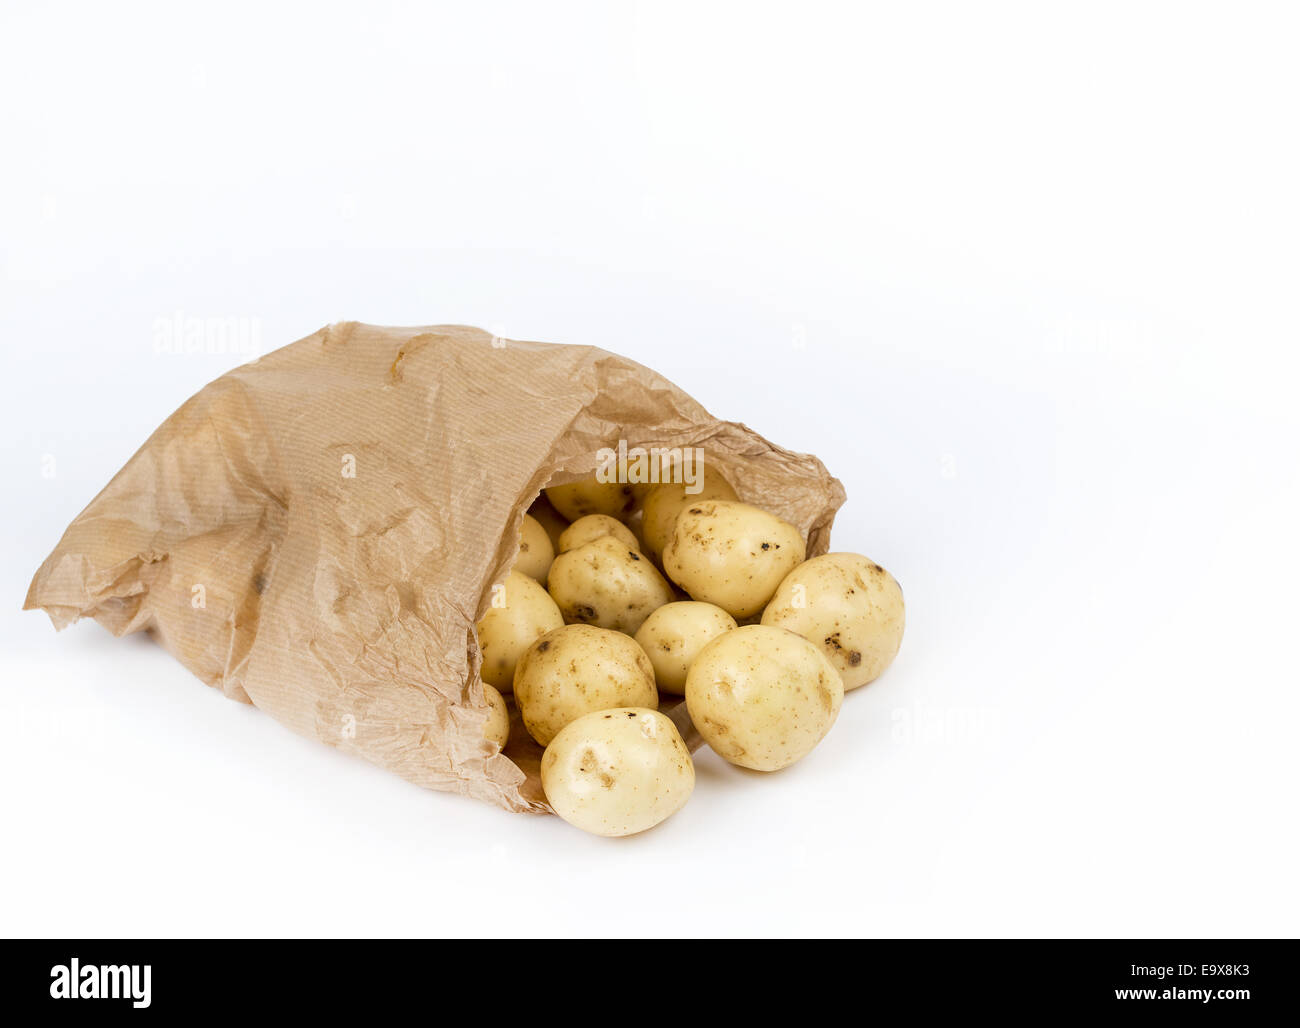 New potatoes in brown bag on white background Stock Photo